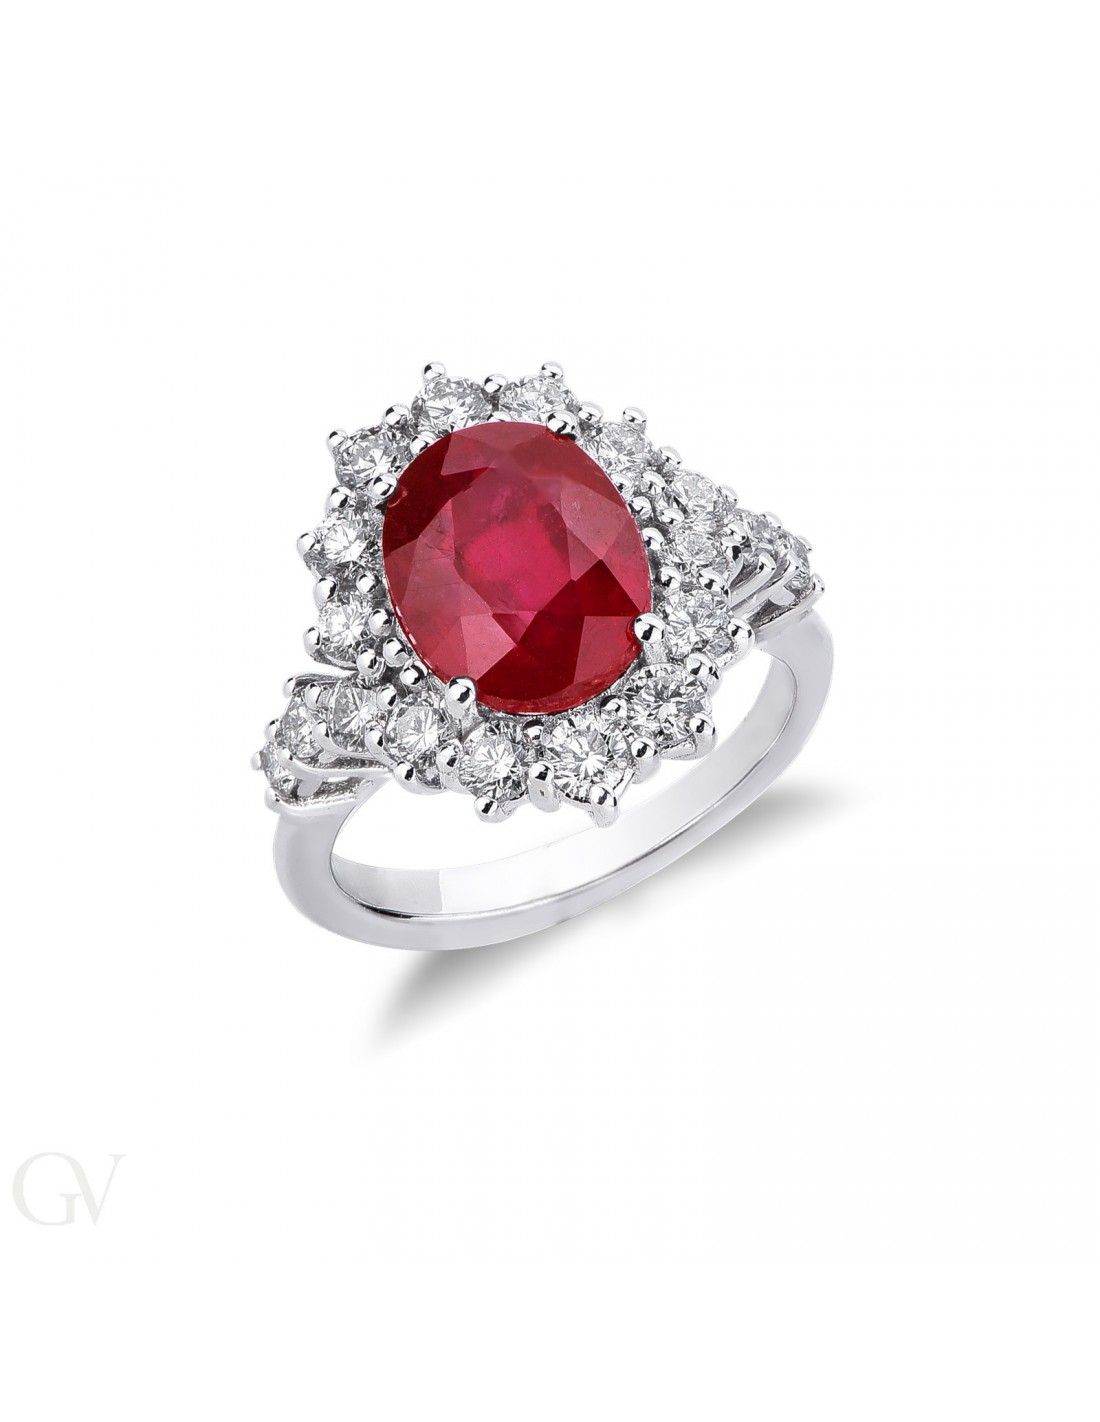 White Gold 18k Halo Ring With A Ruby And Diamonds Measure 14 Regarding Ruby Halo Rings (View 2 of 25)